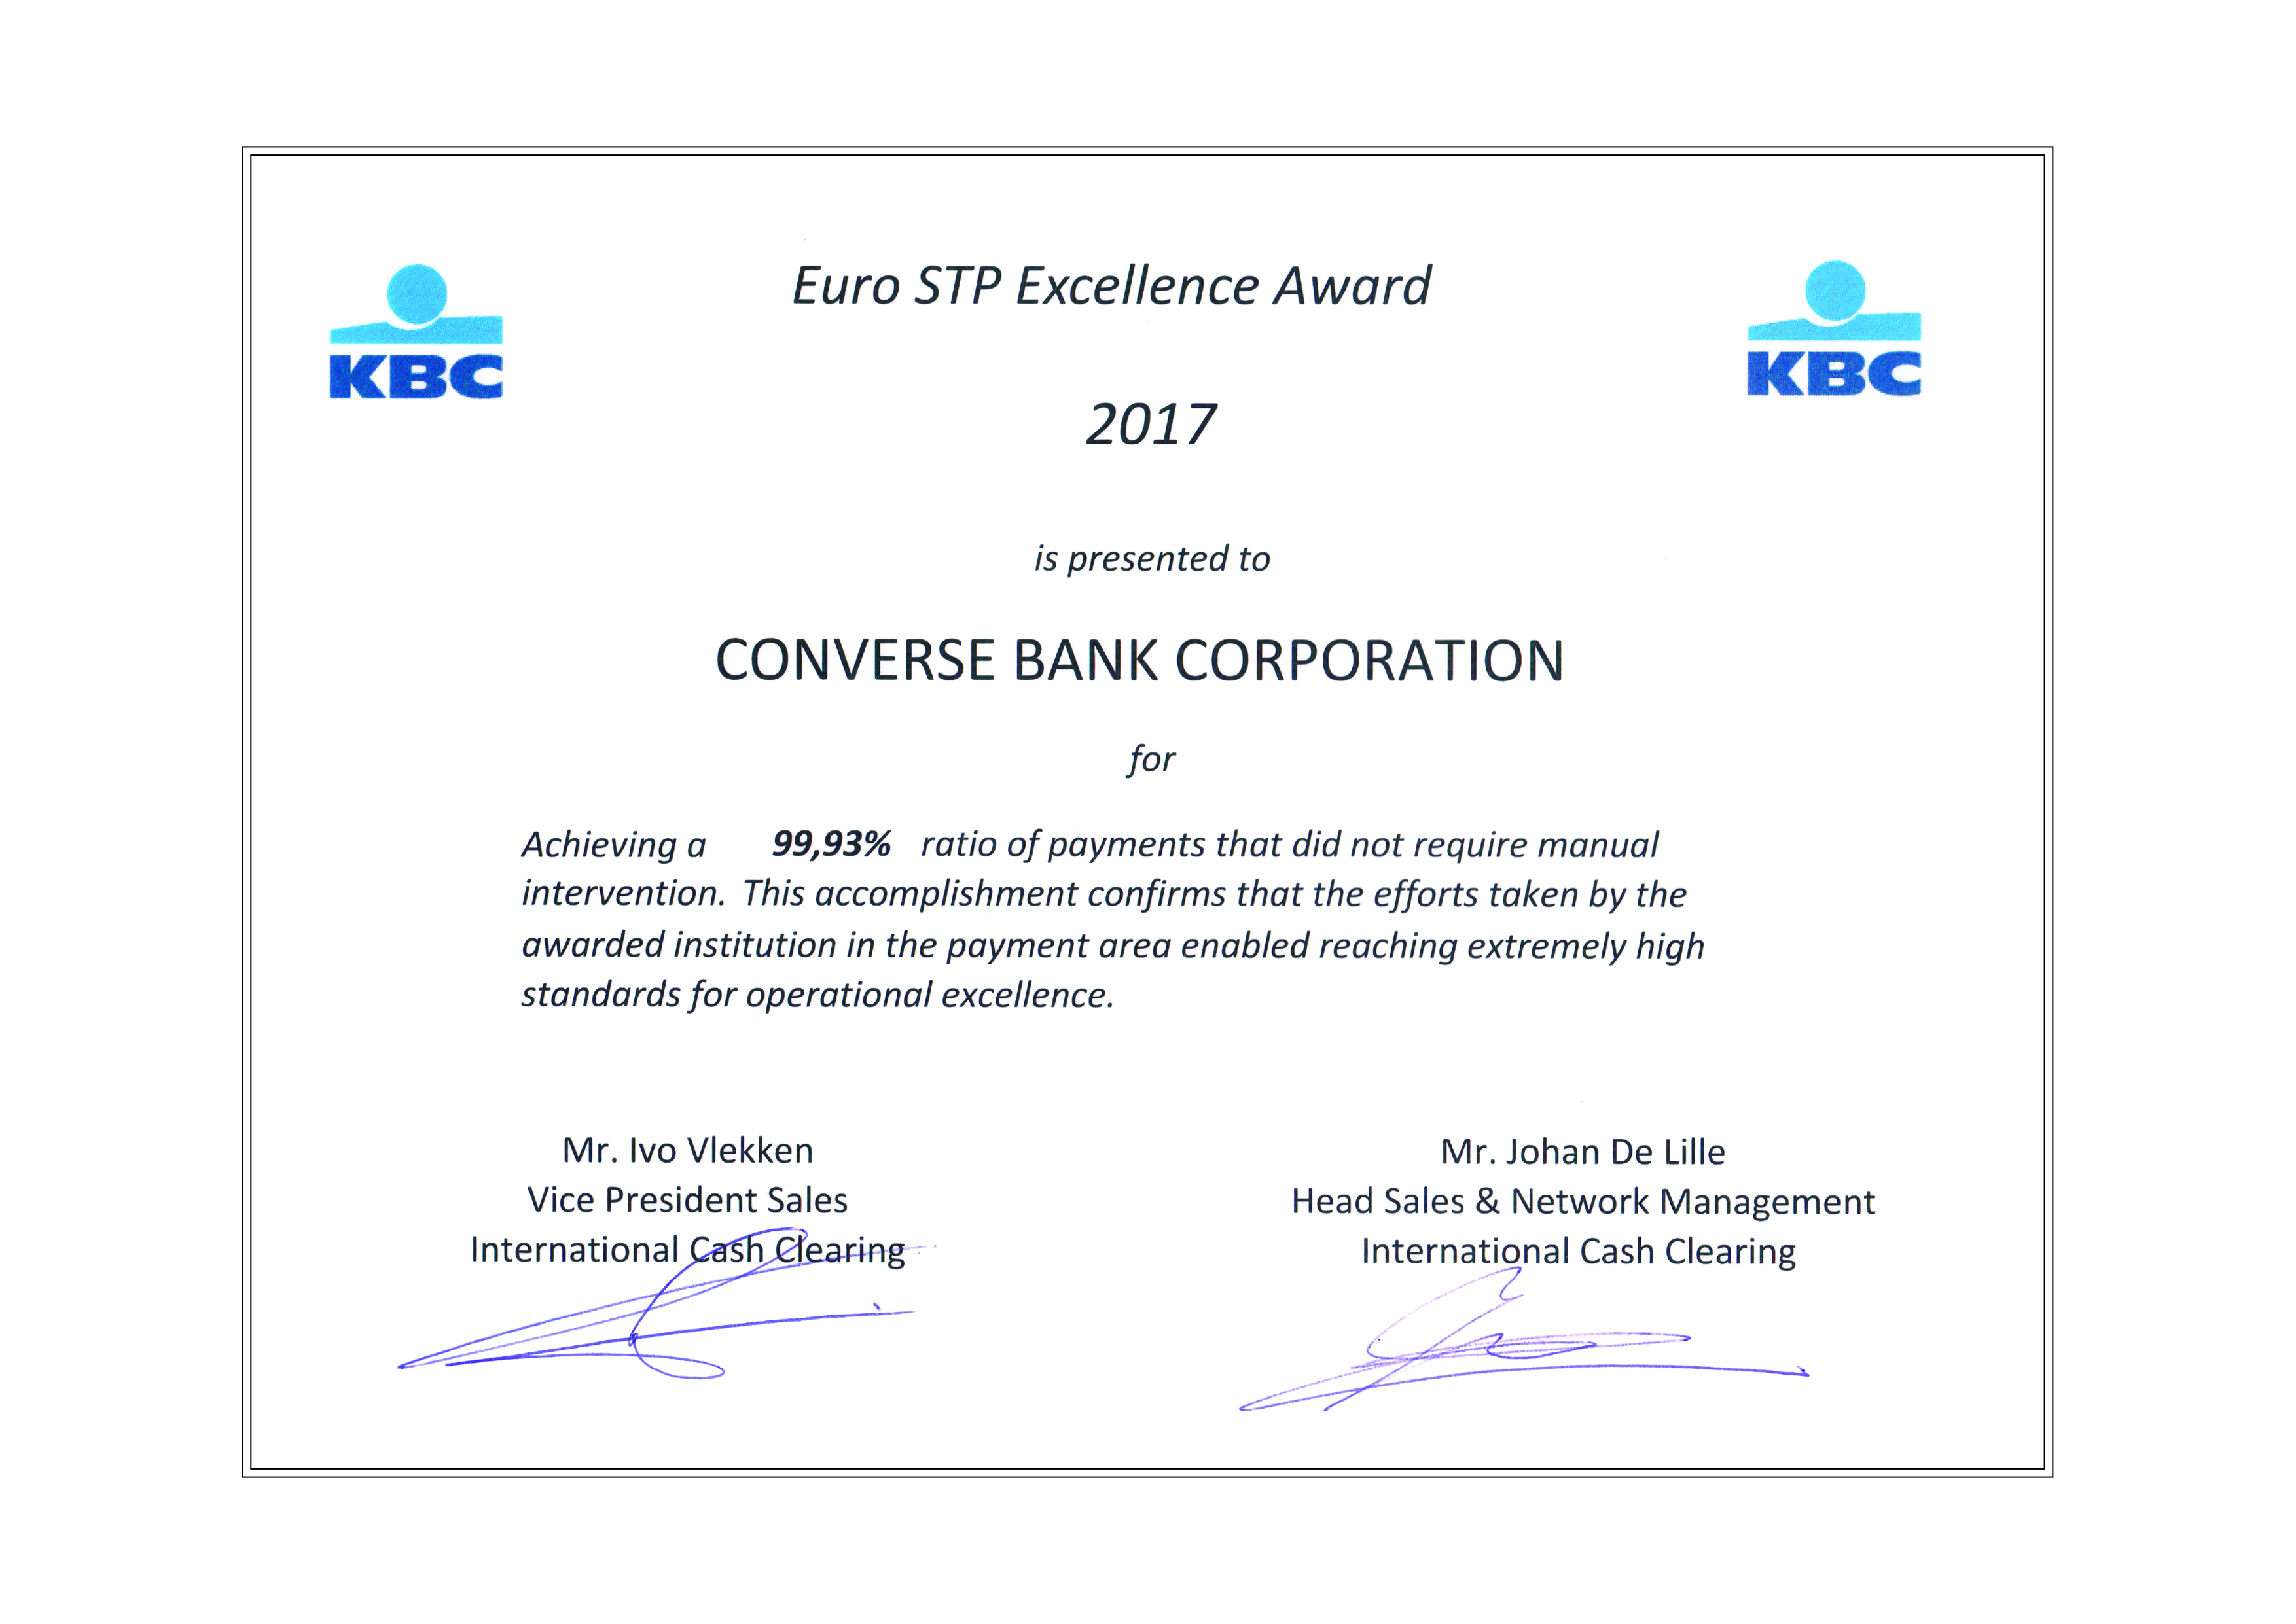 Converse Bank is awarded with an International Prize 1